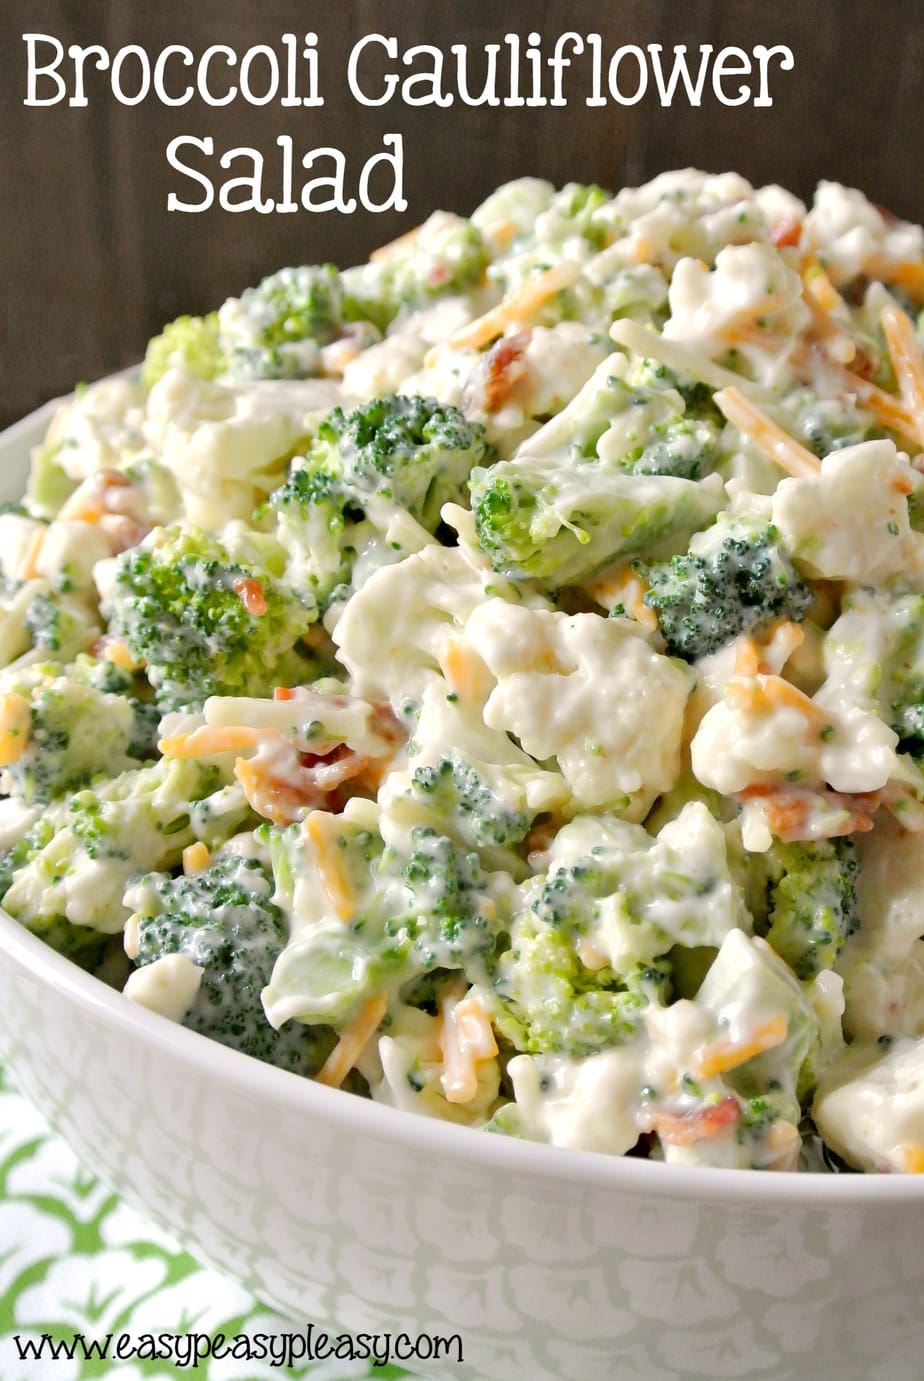 Enjoy this deliciously sweet and easy Broccoli Cauliflower Salad. Make it for a crowd or half the recipe for a family night side dish.